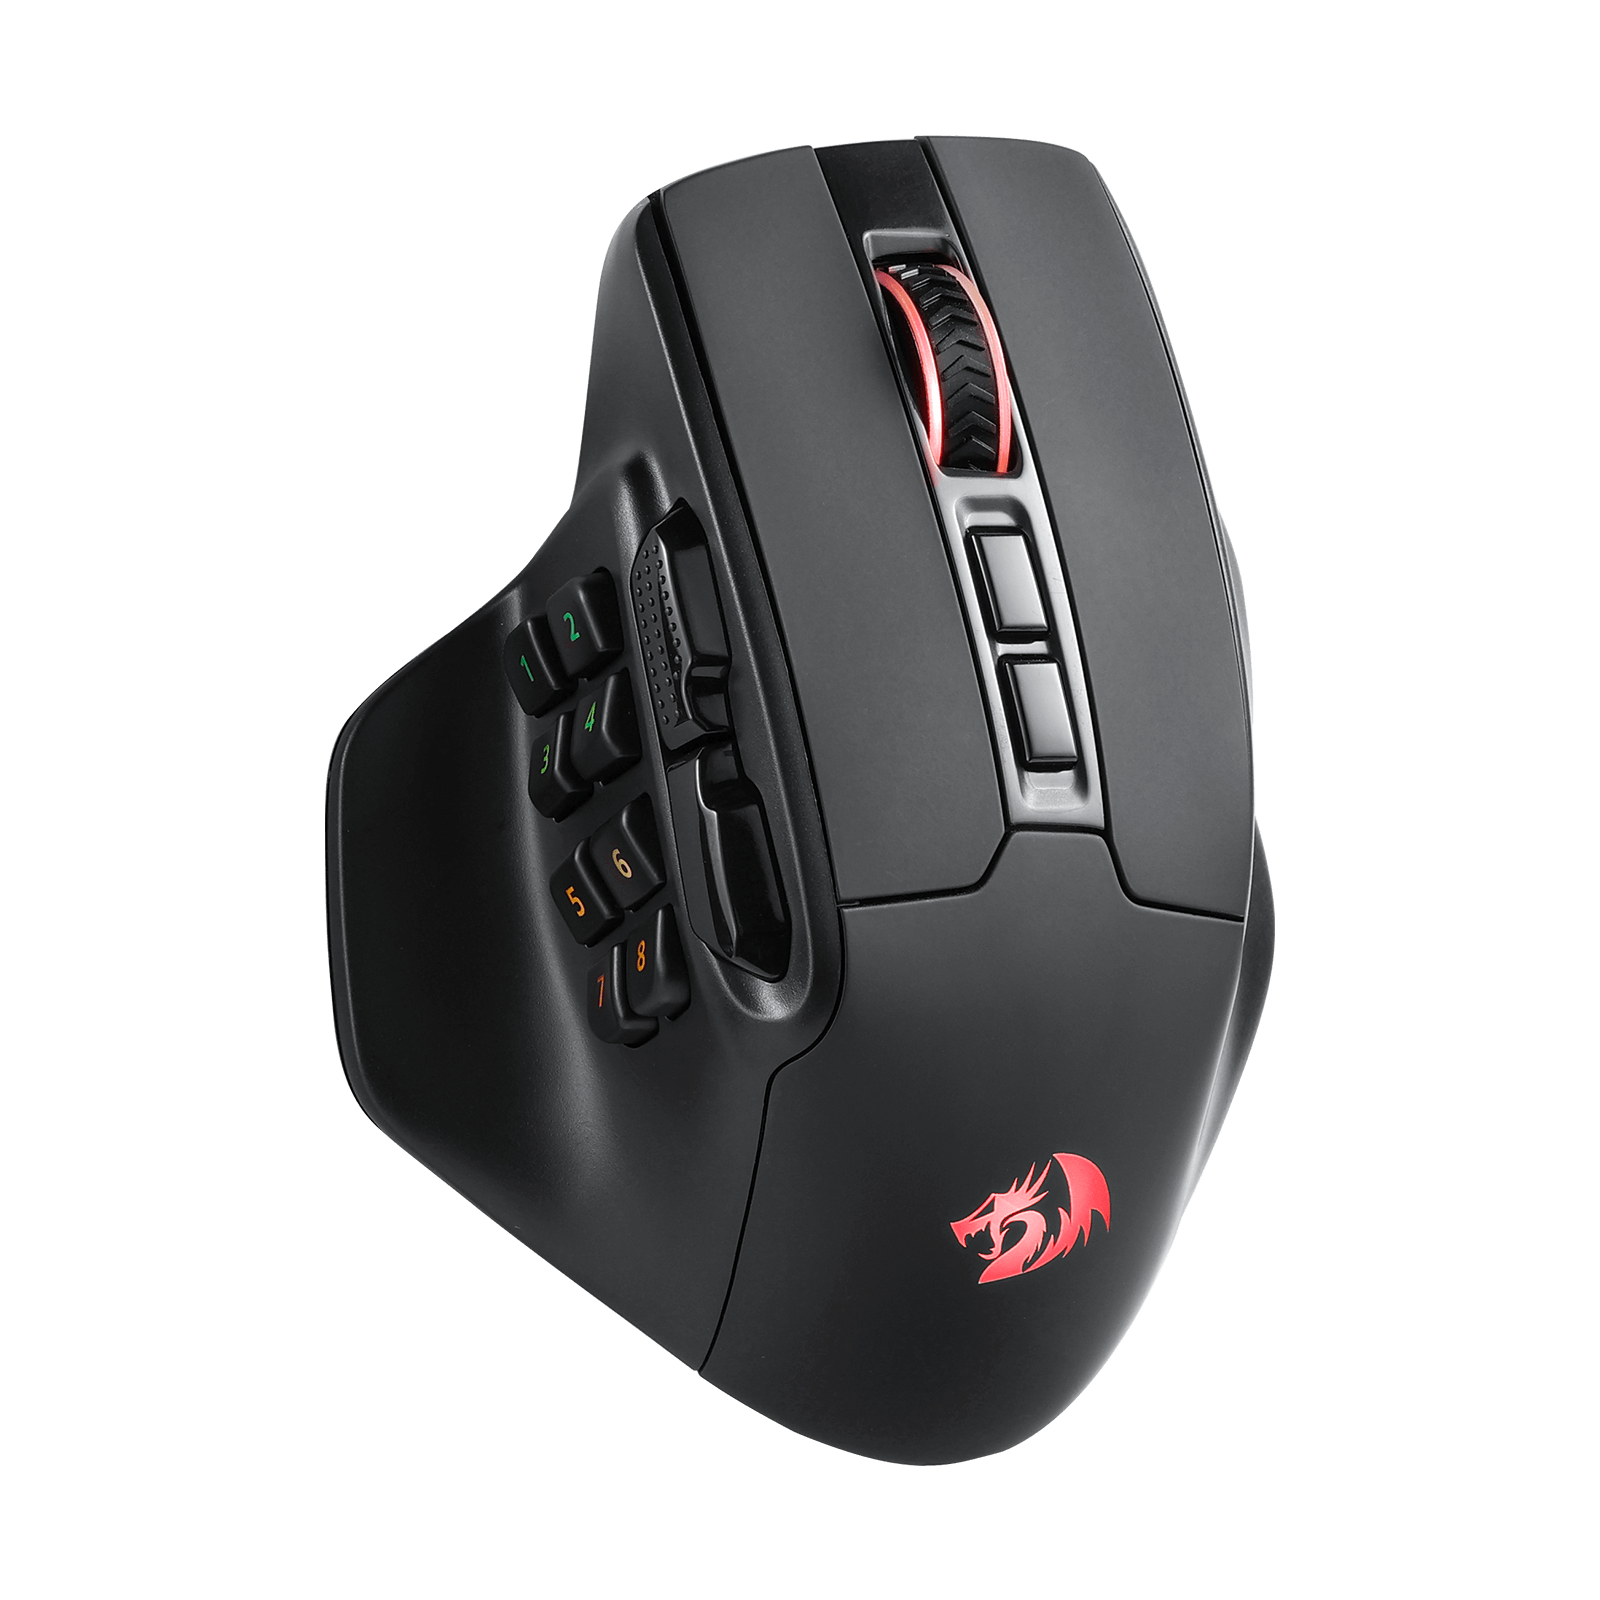 The CHEAPEST Pixart 3395 Gaming Mouse I've Seen and Tried!